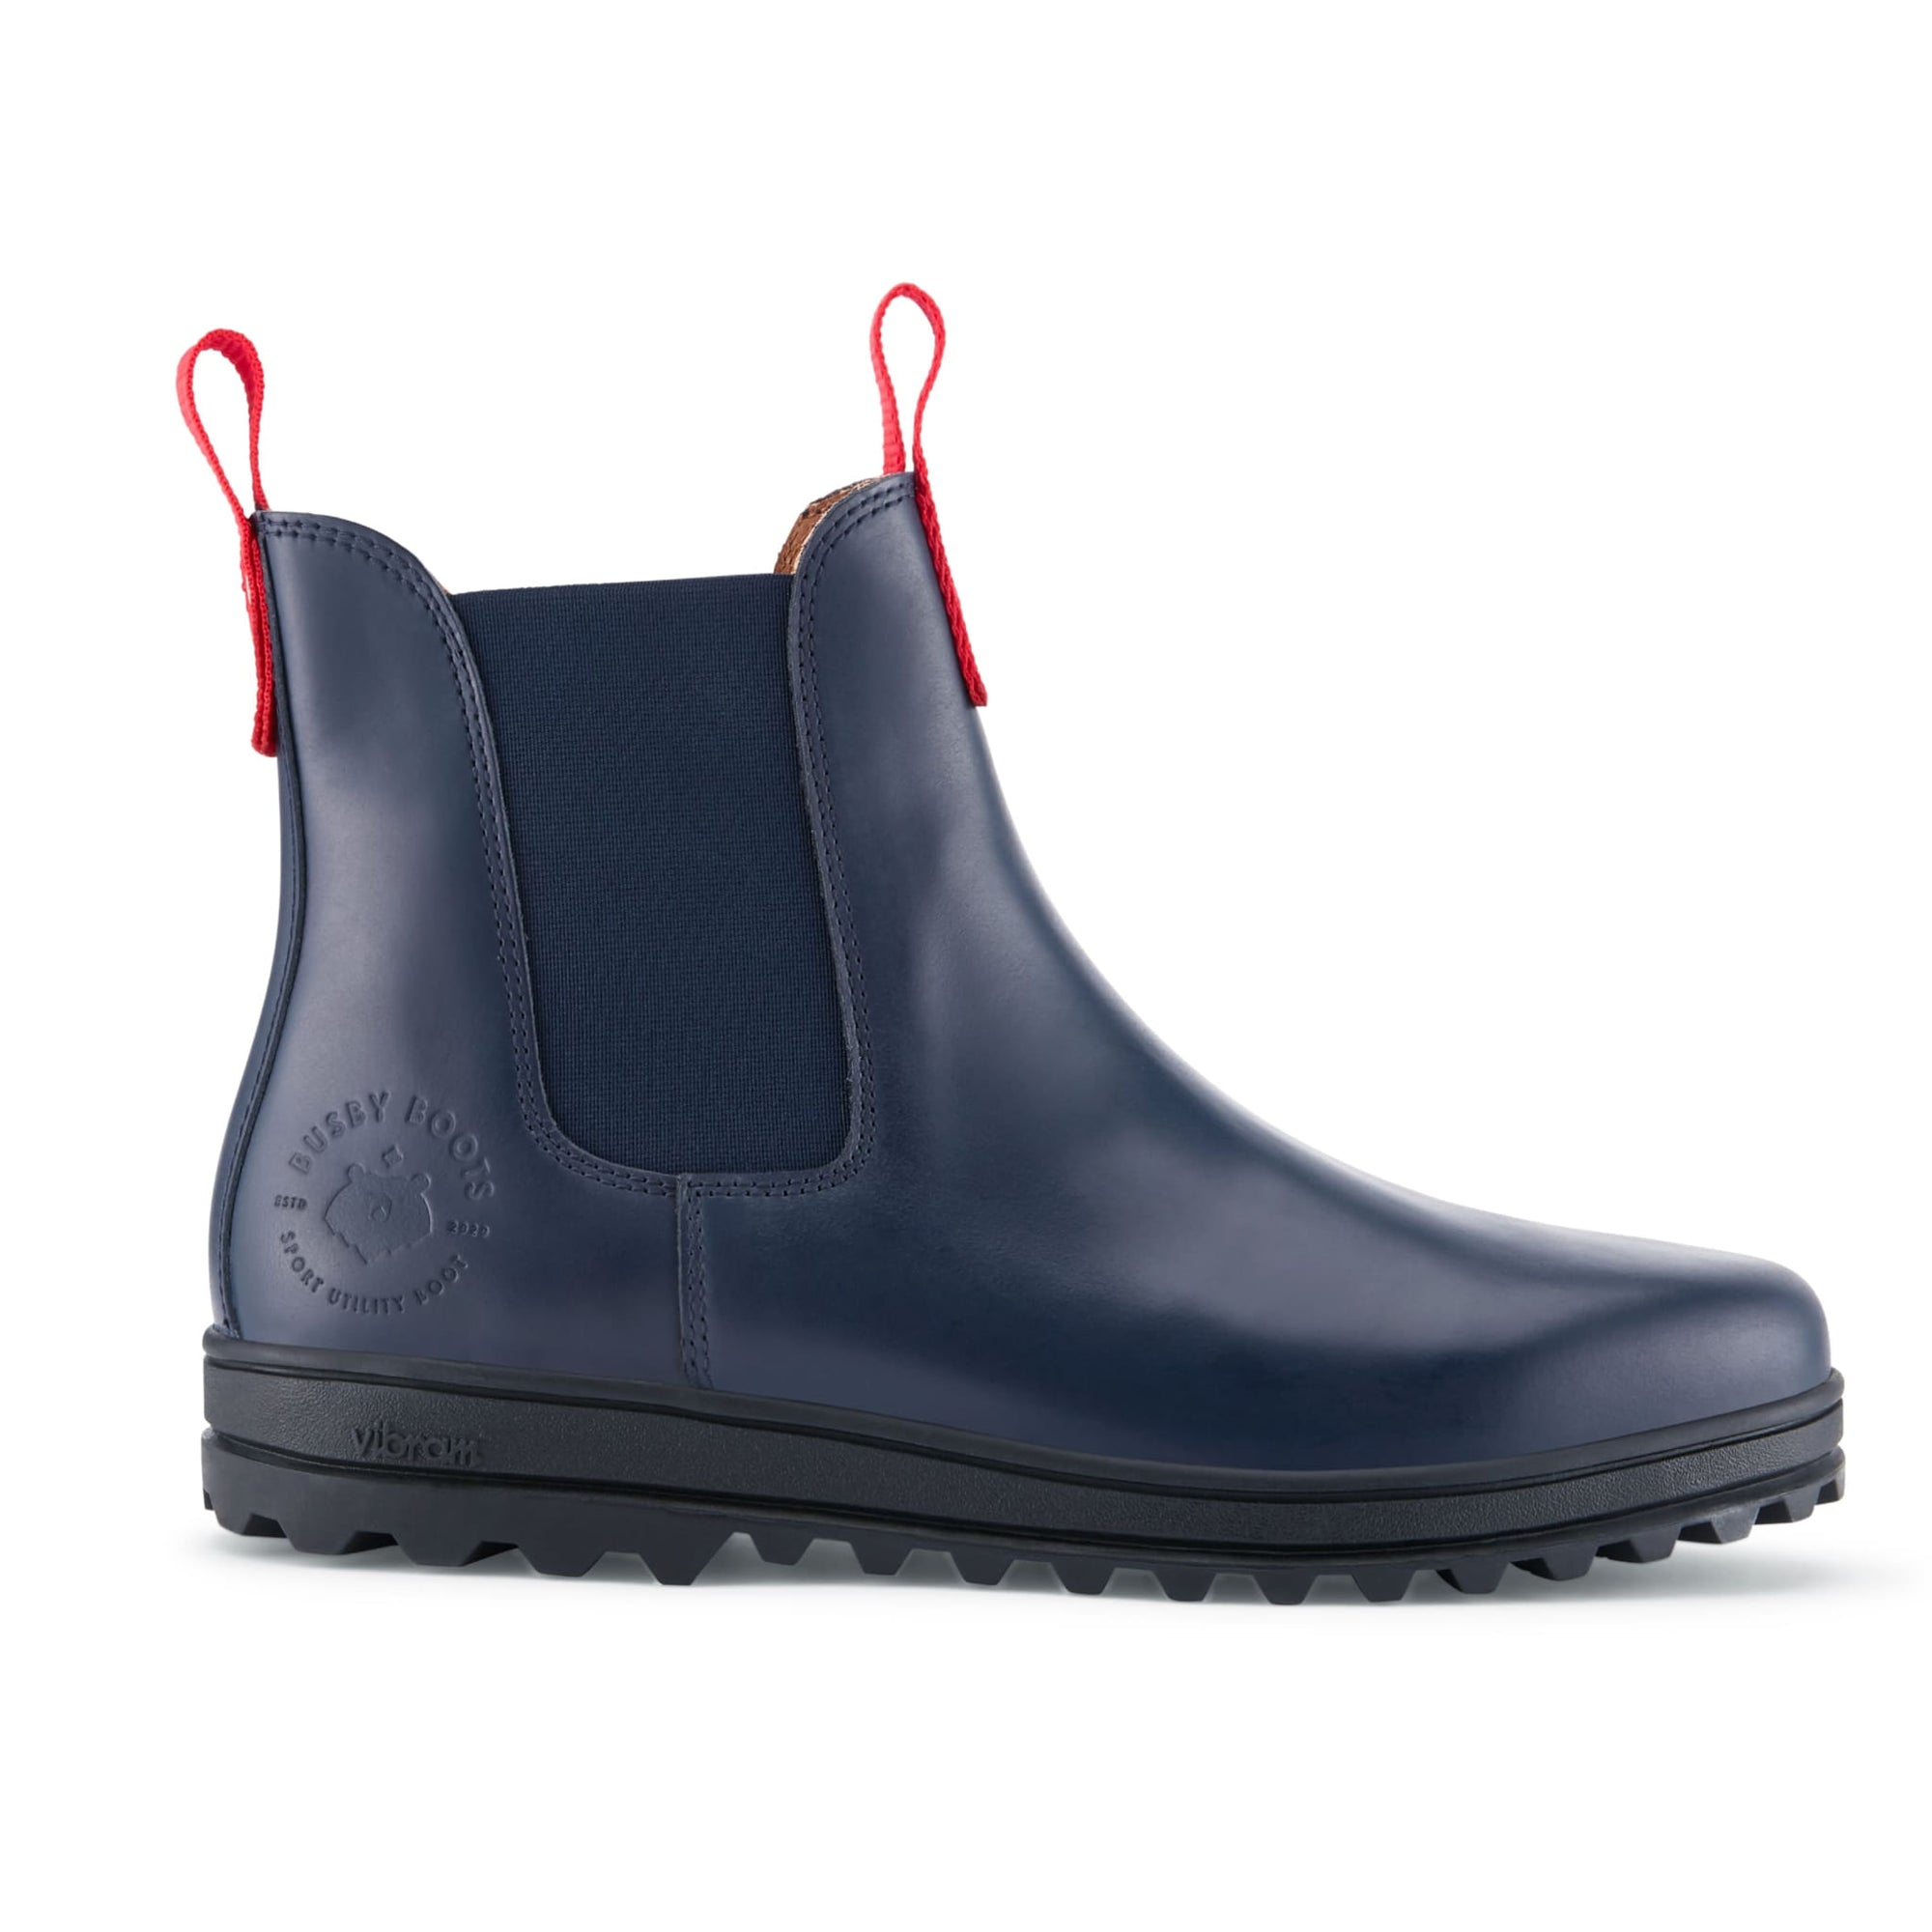 Busby Men's Winter Chelsea Boot, Navy Blue Leather